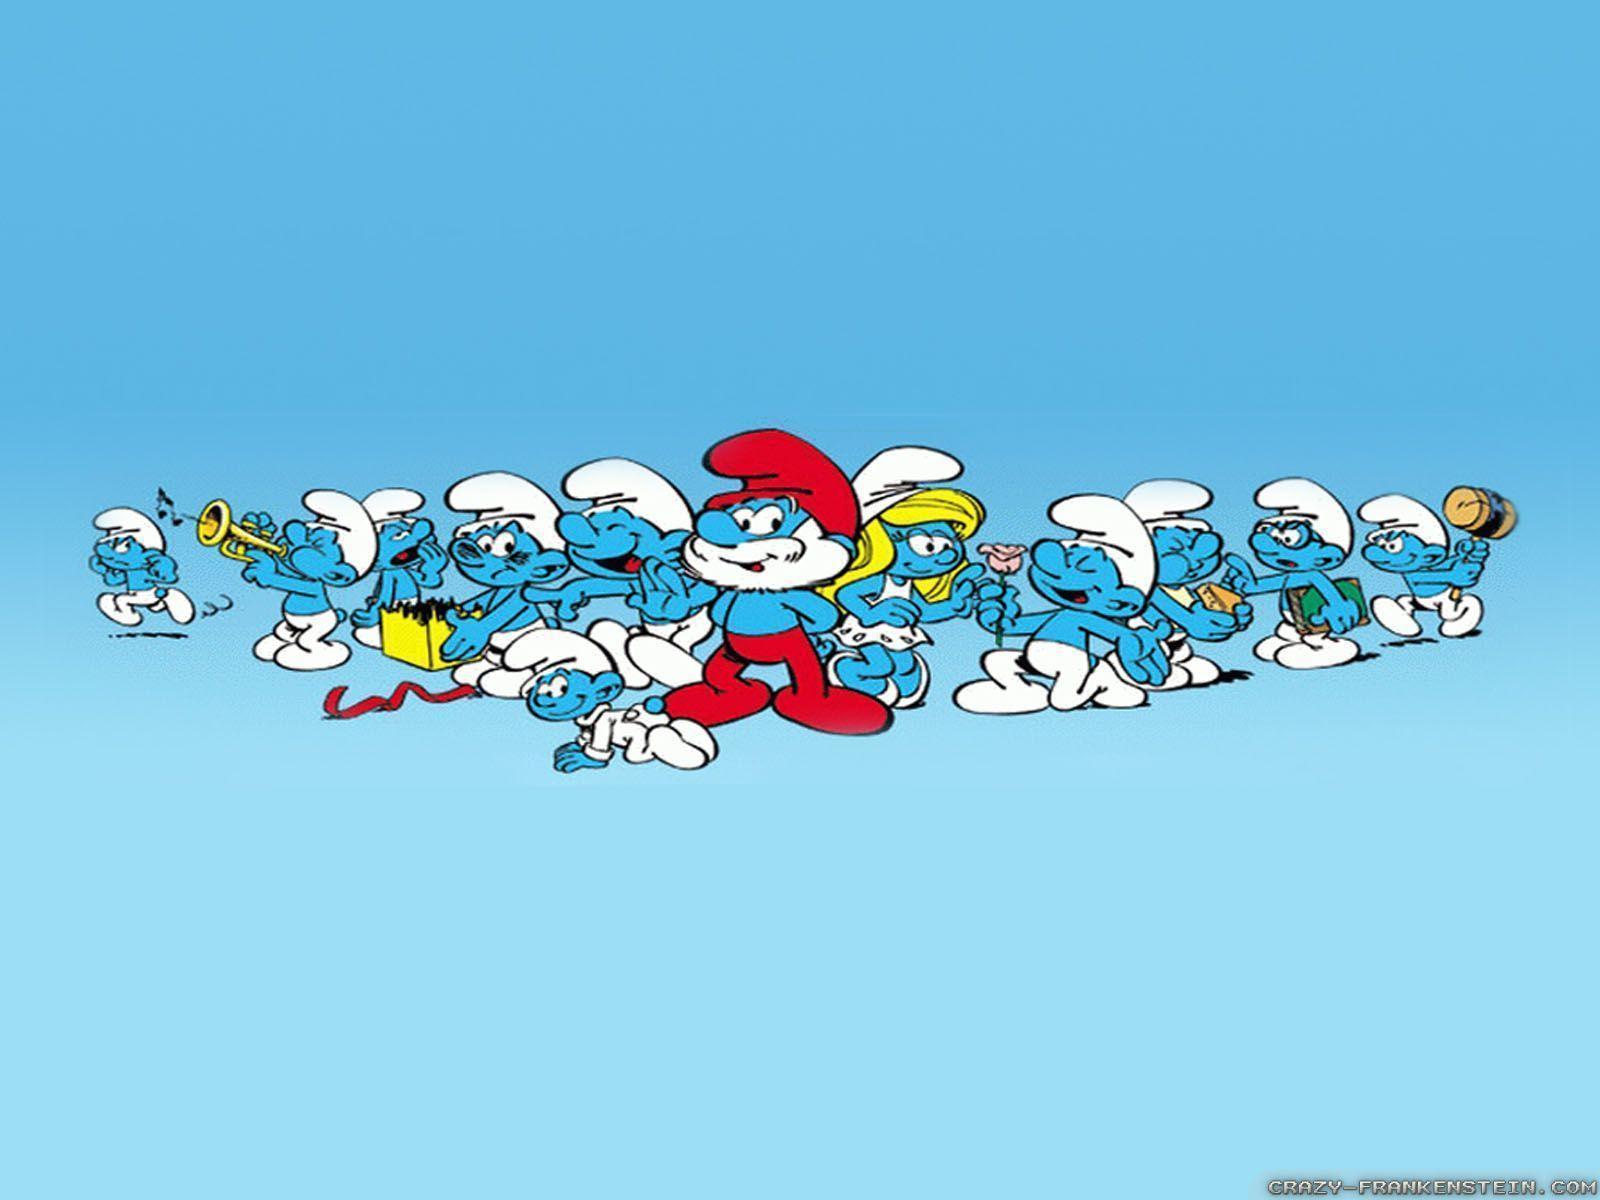 Wallpaper ID 379287  Movie The Smurfs Phone Wallpaper  1080x2160 free  download